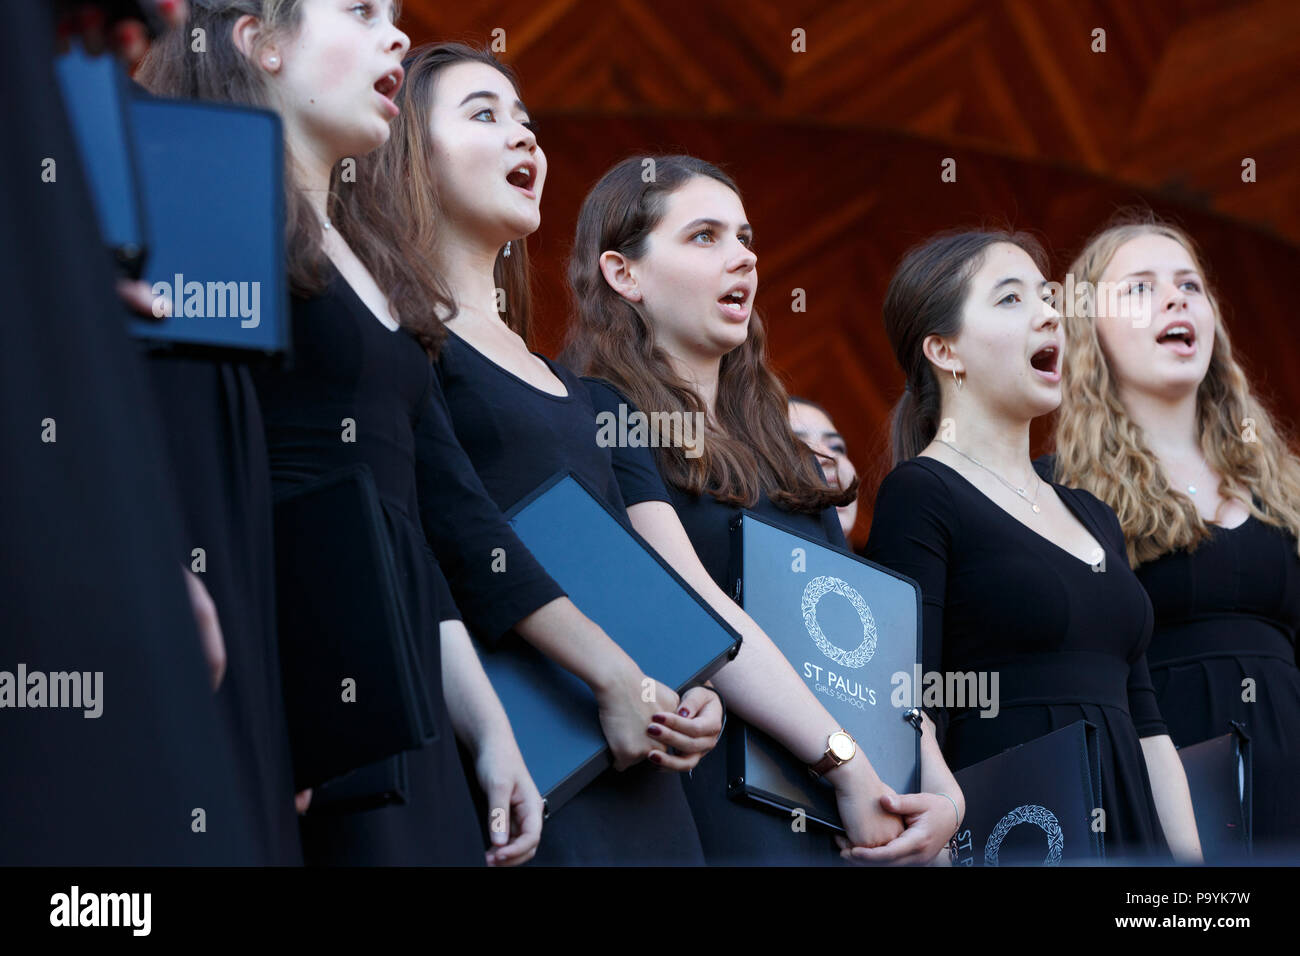 Paulina Voices of St. Paul's Girls' School perform with the Boston Landmarks Orchestra at the Hatch Shell on the Esplande, Boston Massachusetts Stock Photo